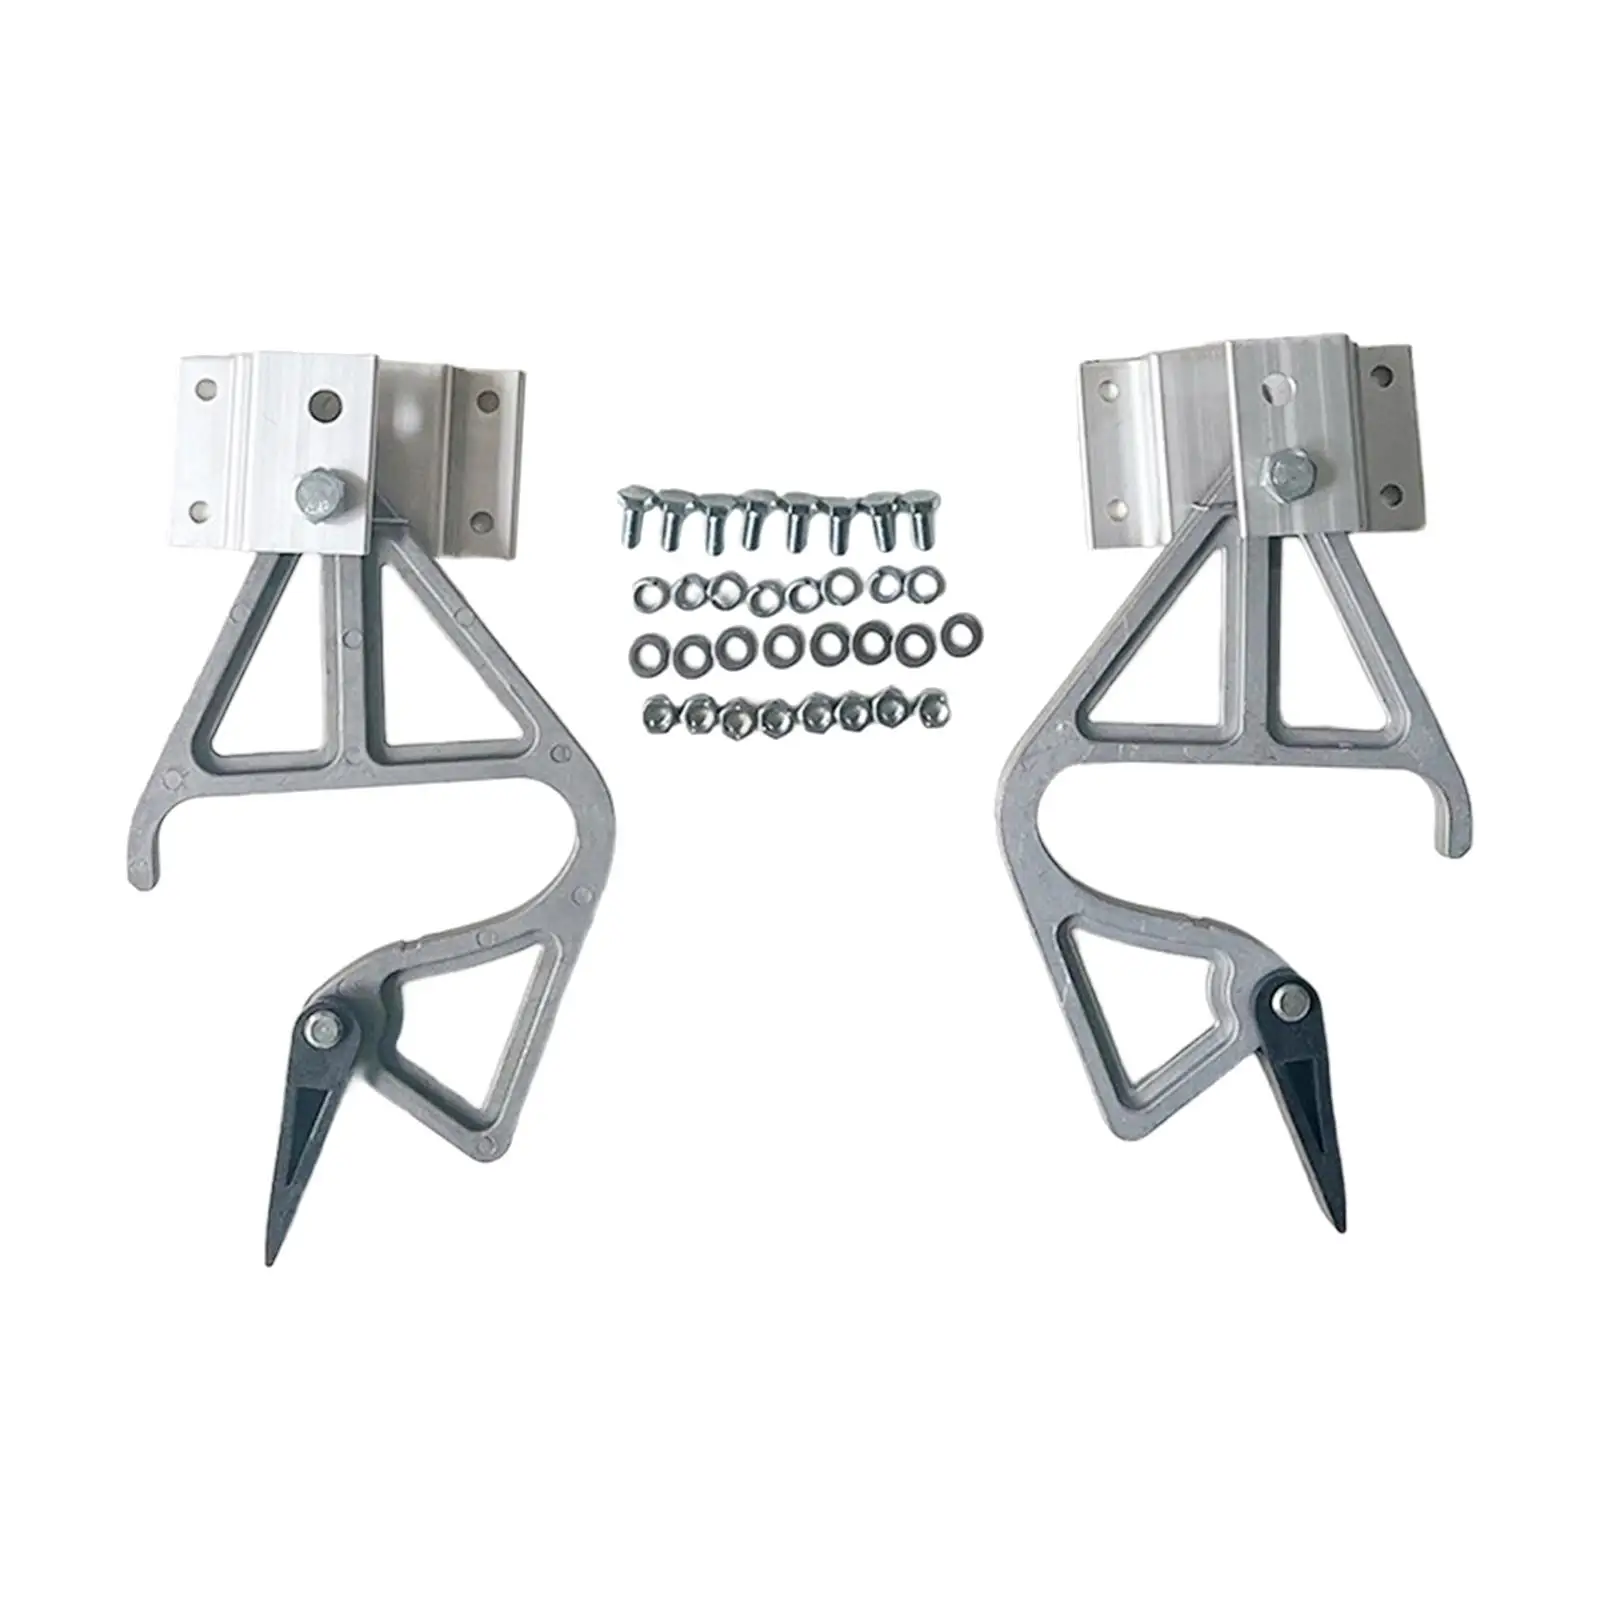 Extension Ladder Rung Lock Kit Aluminum Alloy for 28-11 Extension Ladders Sturdy Easy to Install High Reliability Professional